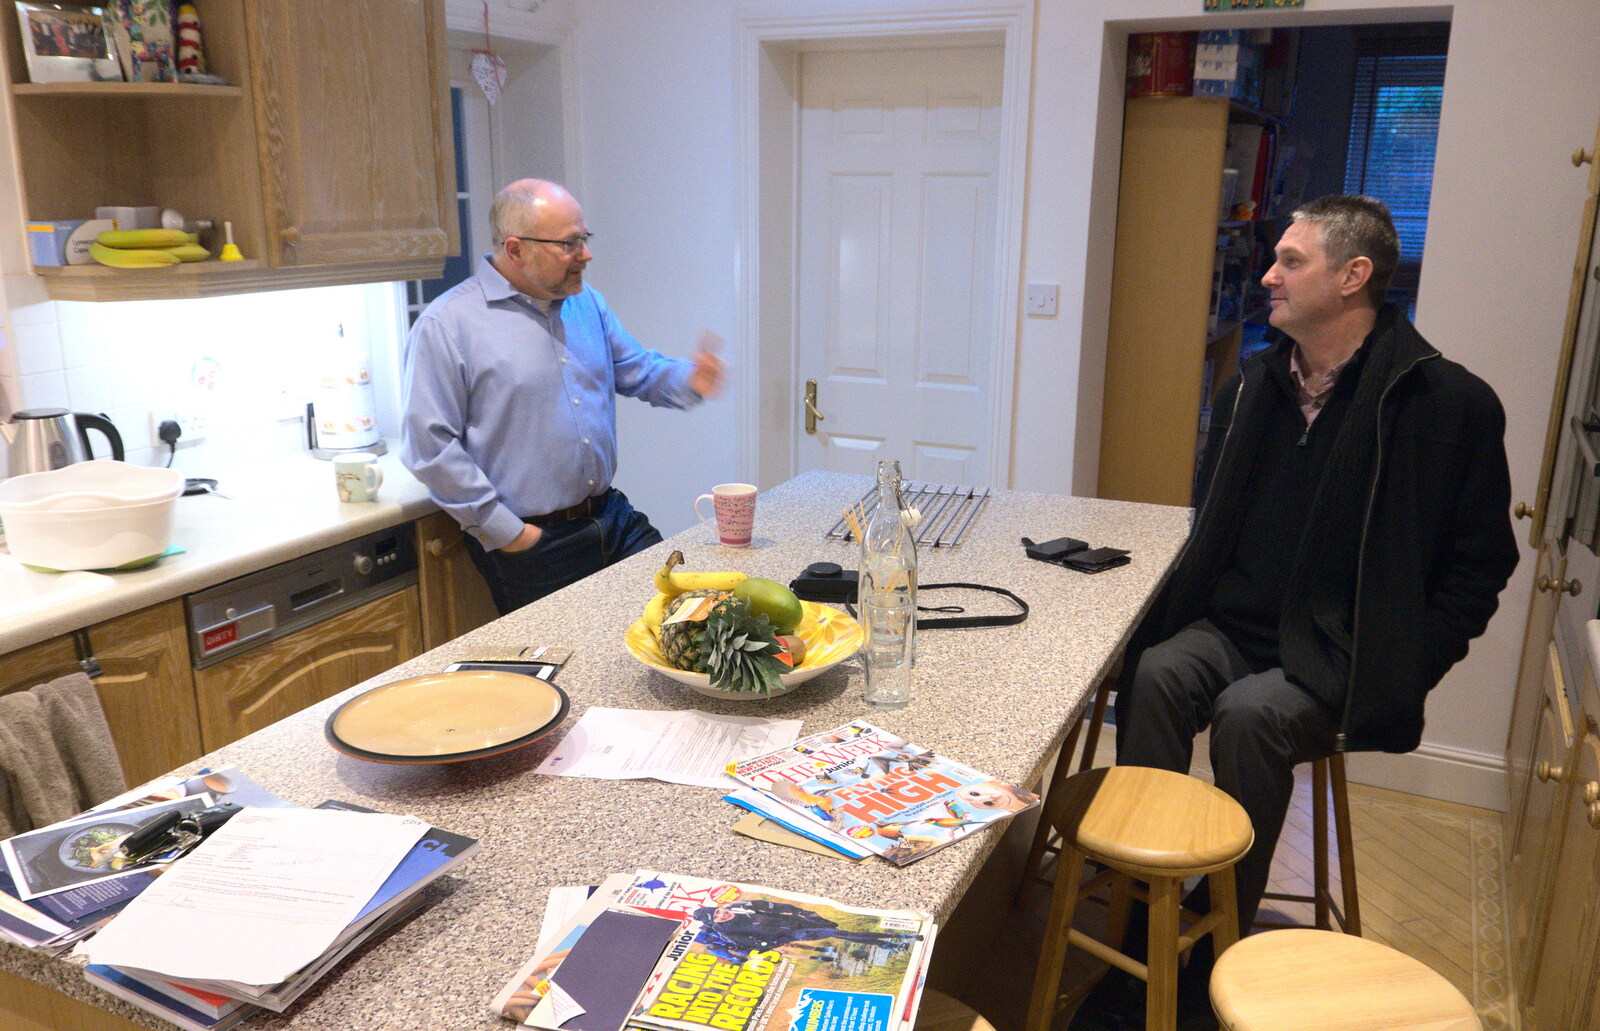 Hamish and Sean chat in the kitchen from A Wintry Trip Down South, Walkford, Dorset - 1st February 2019